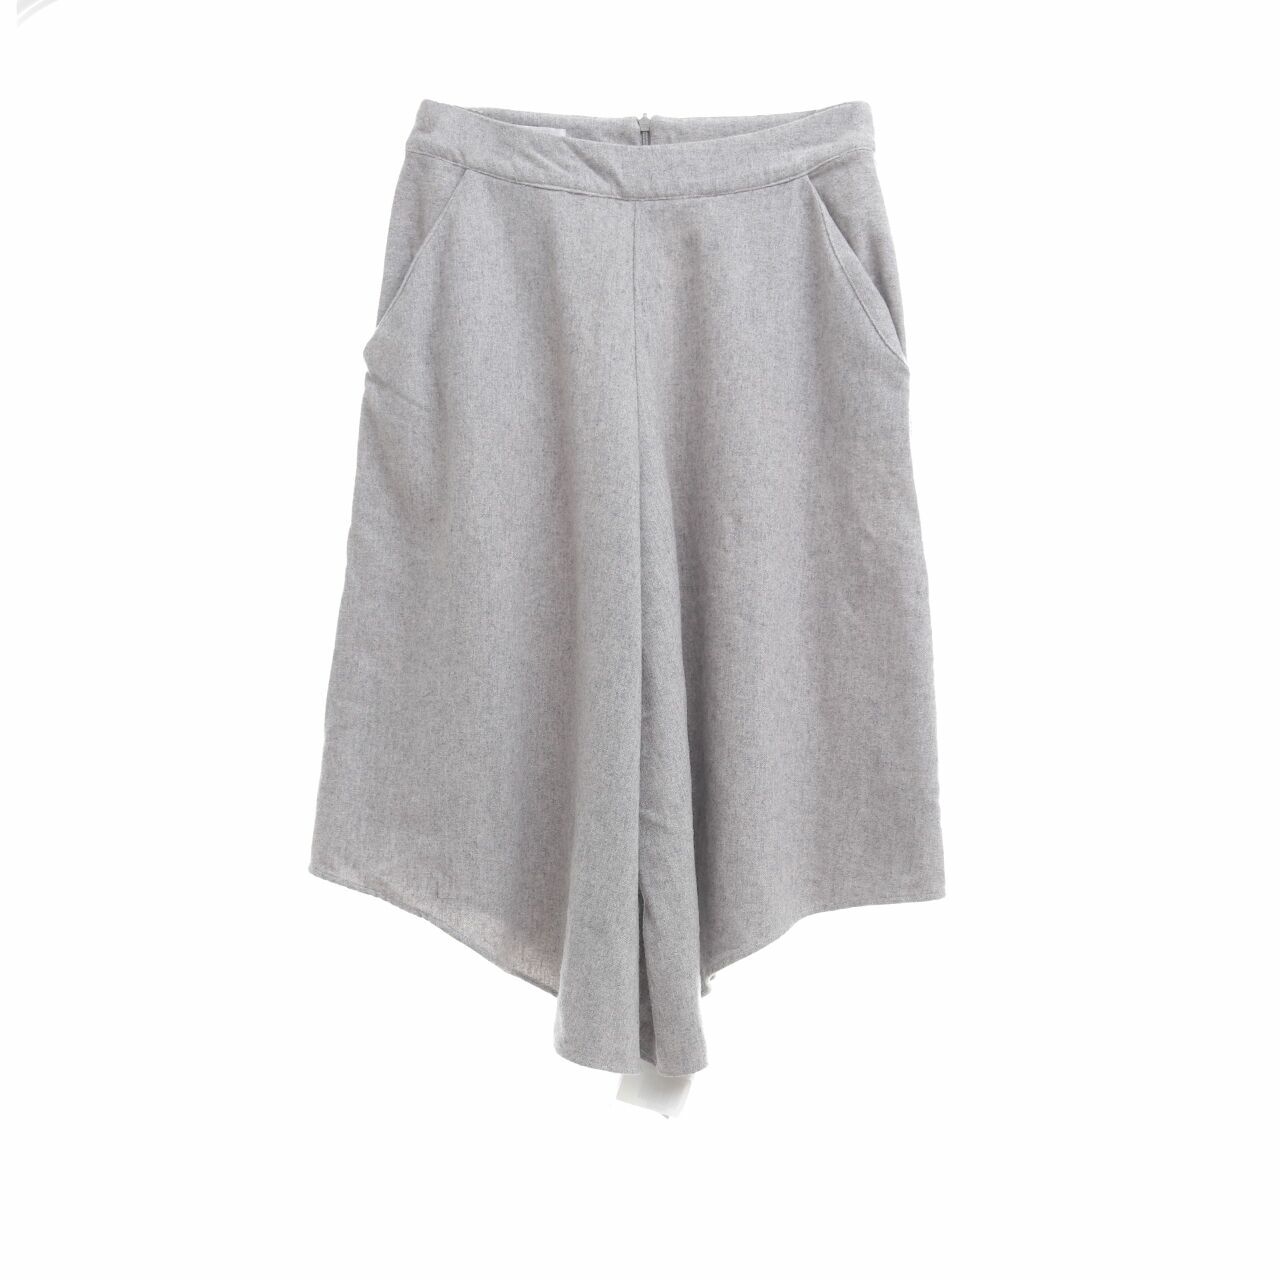 Apparel After Dark Grey Cropped Pants